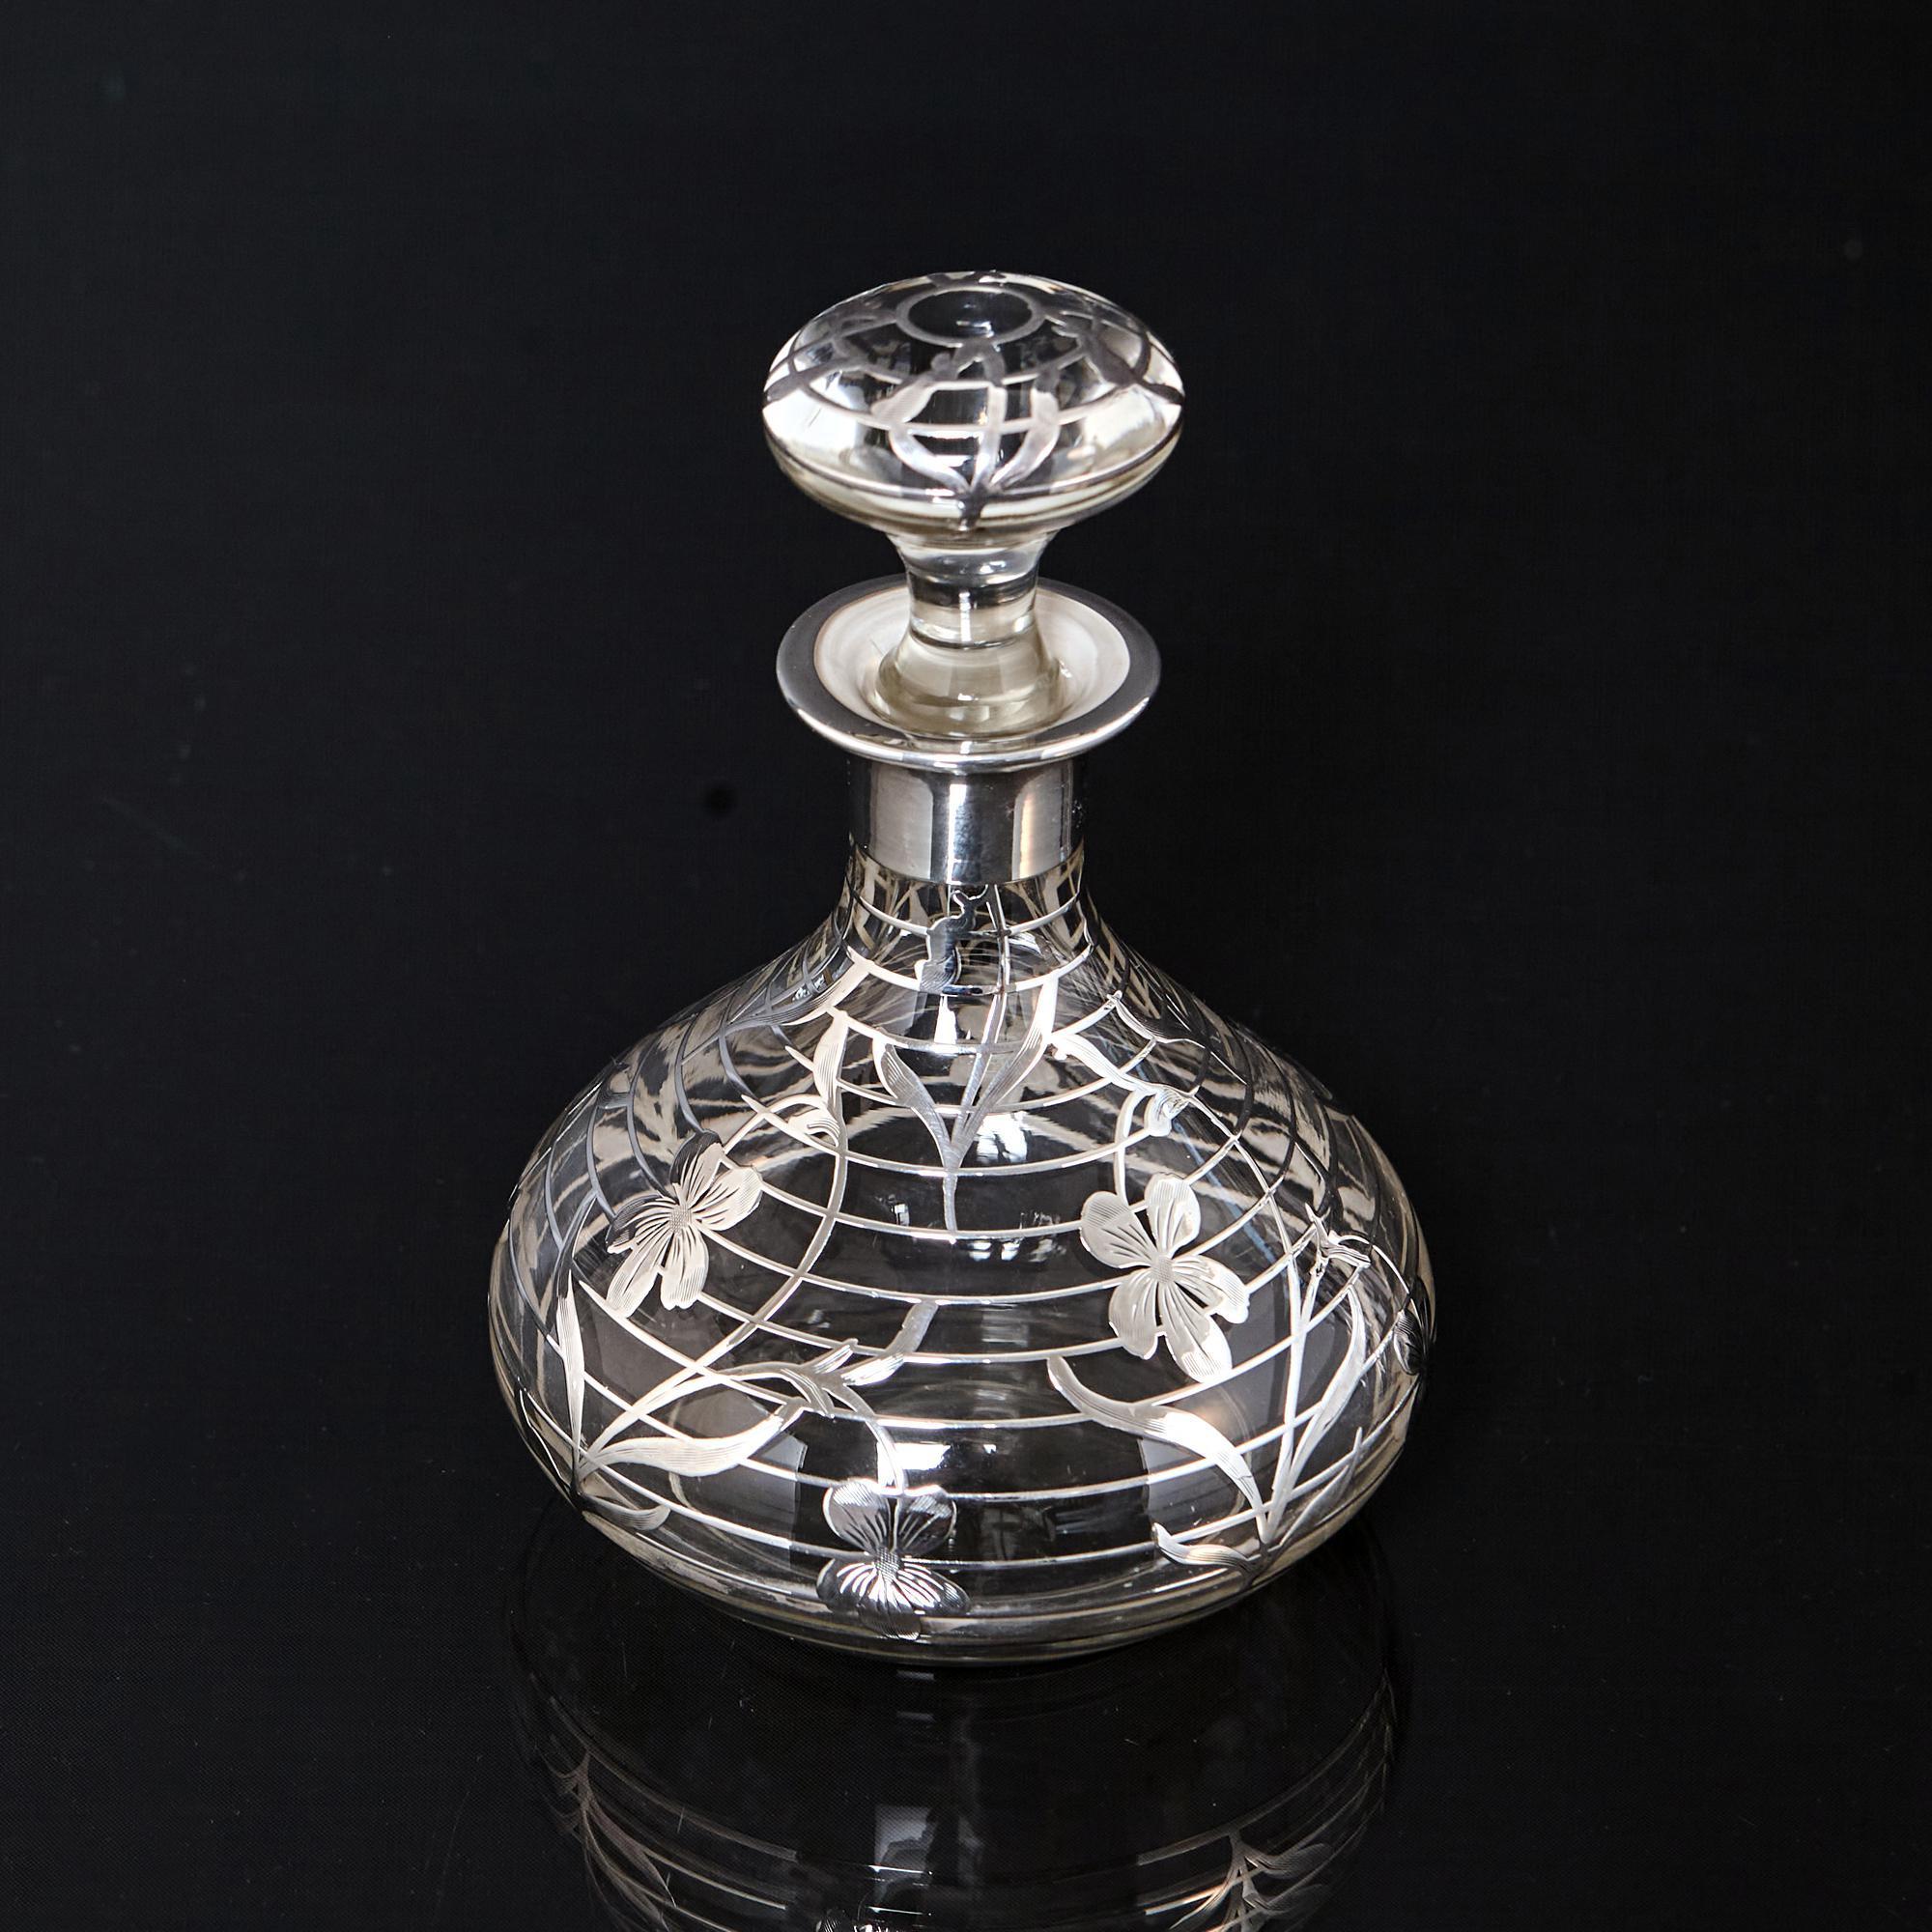 Hand-blown antique American glass perfume bottle overlaid with open-work silver banding and engraved floral decorations.

In 1889, the decorative technique of applying sterling silver designs to glass was patented by Oscar Pierre Erand and John